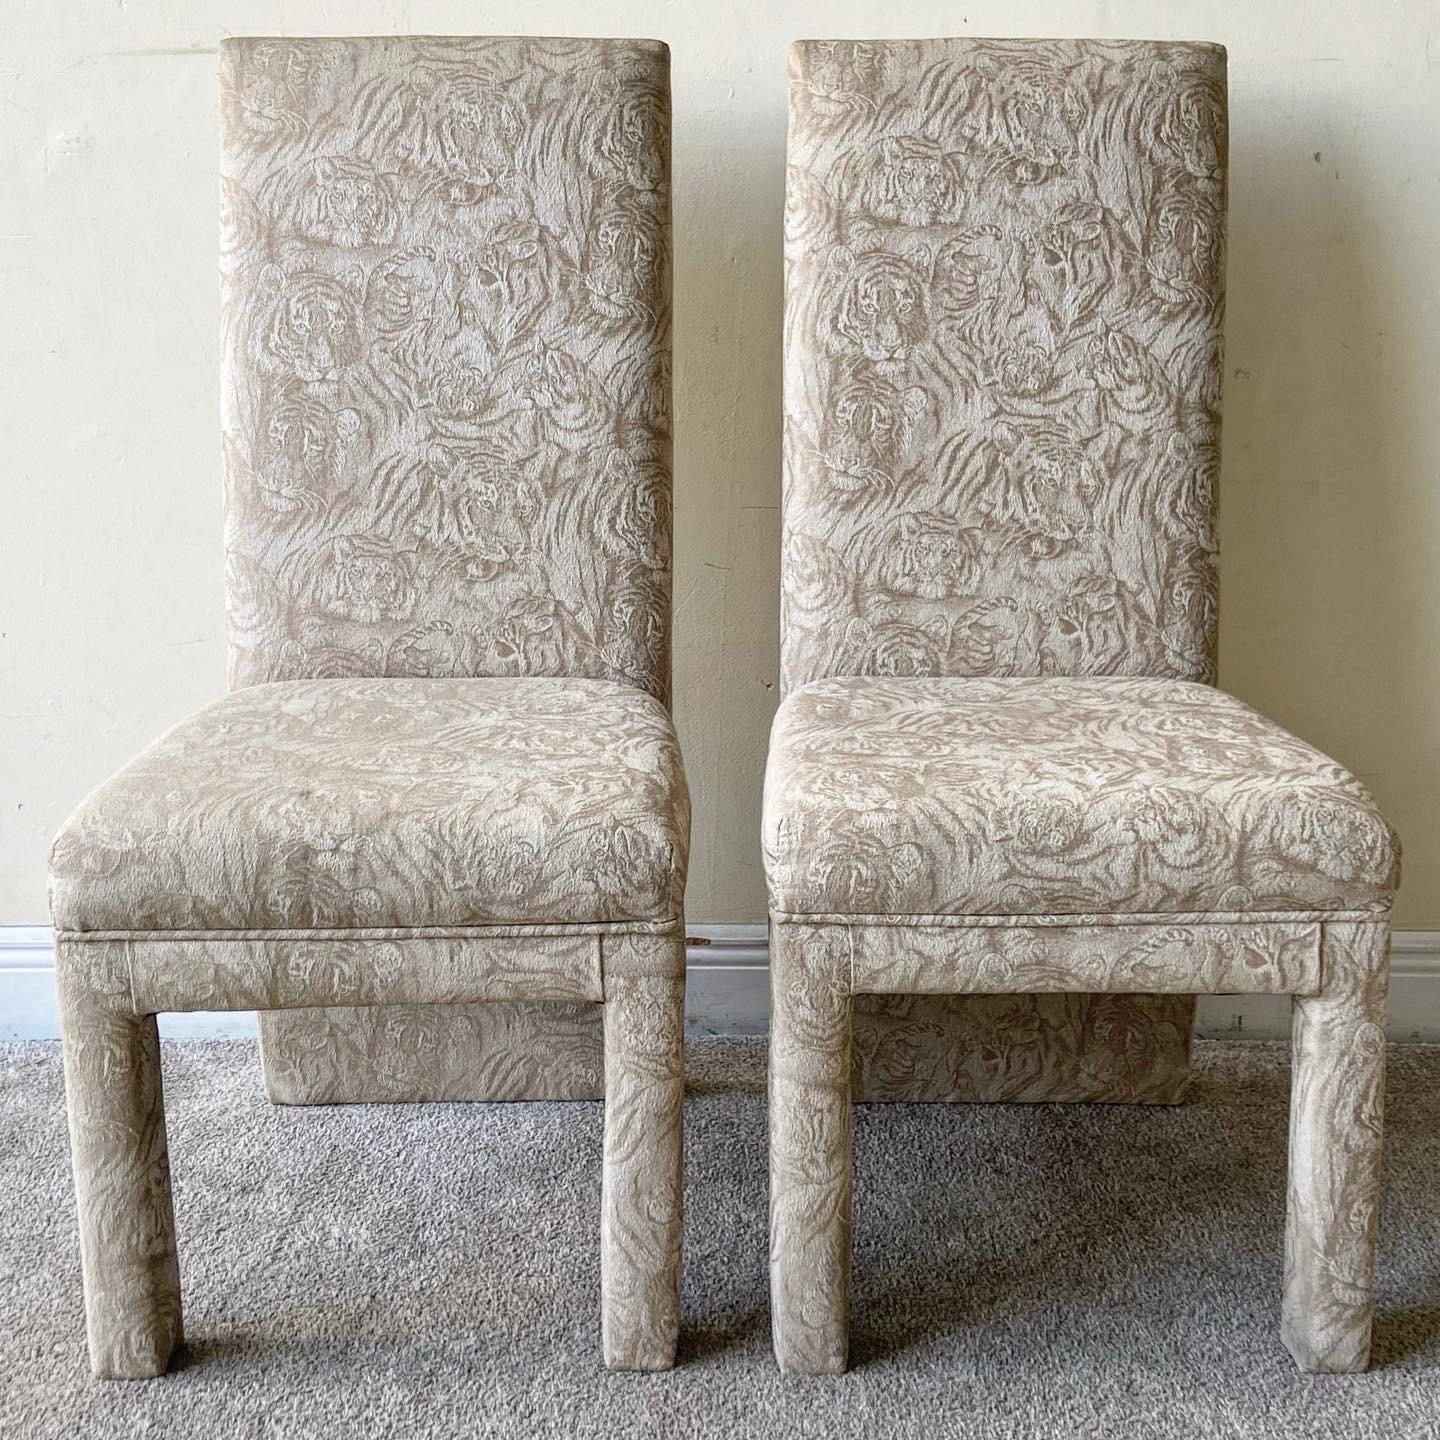 Incredible set of 4 parsons dining chairs. Each chair features an amazing beige fabric with tiger faces tessellating the surface of the chairs. Seat Height: 18.0 in